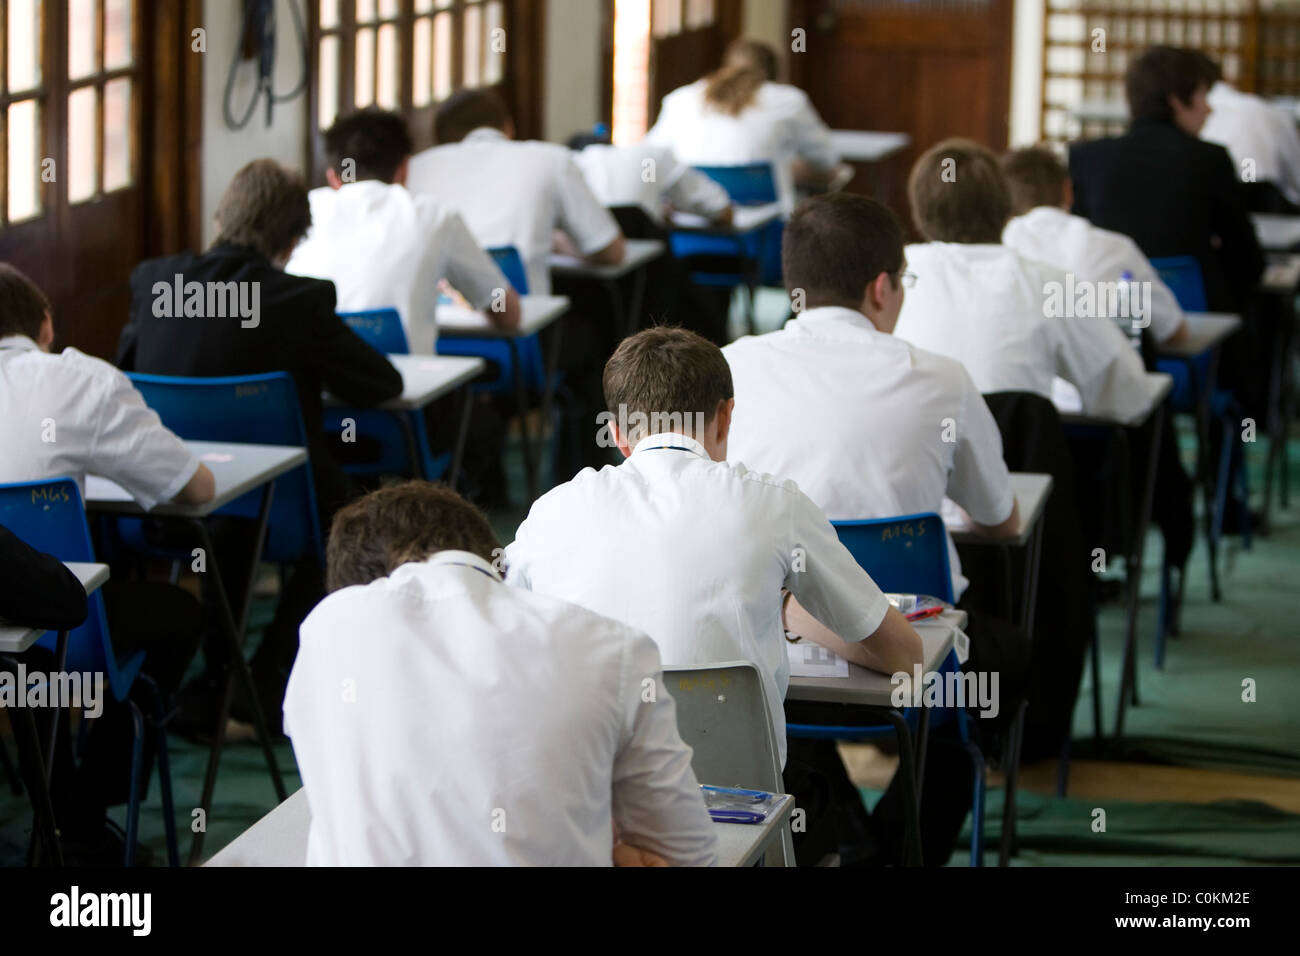 Pupils fill an exam hall to take a GCSE exam at Maidstone Grammar school in Maidstone, Kent, U.K. Stock Photo